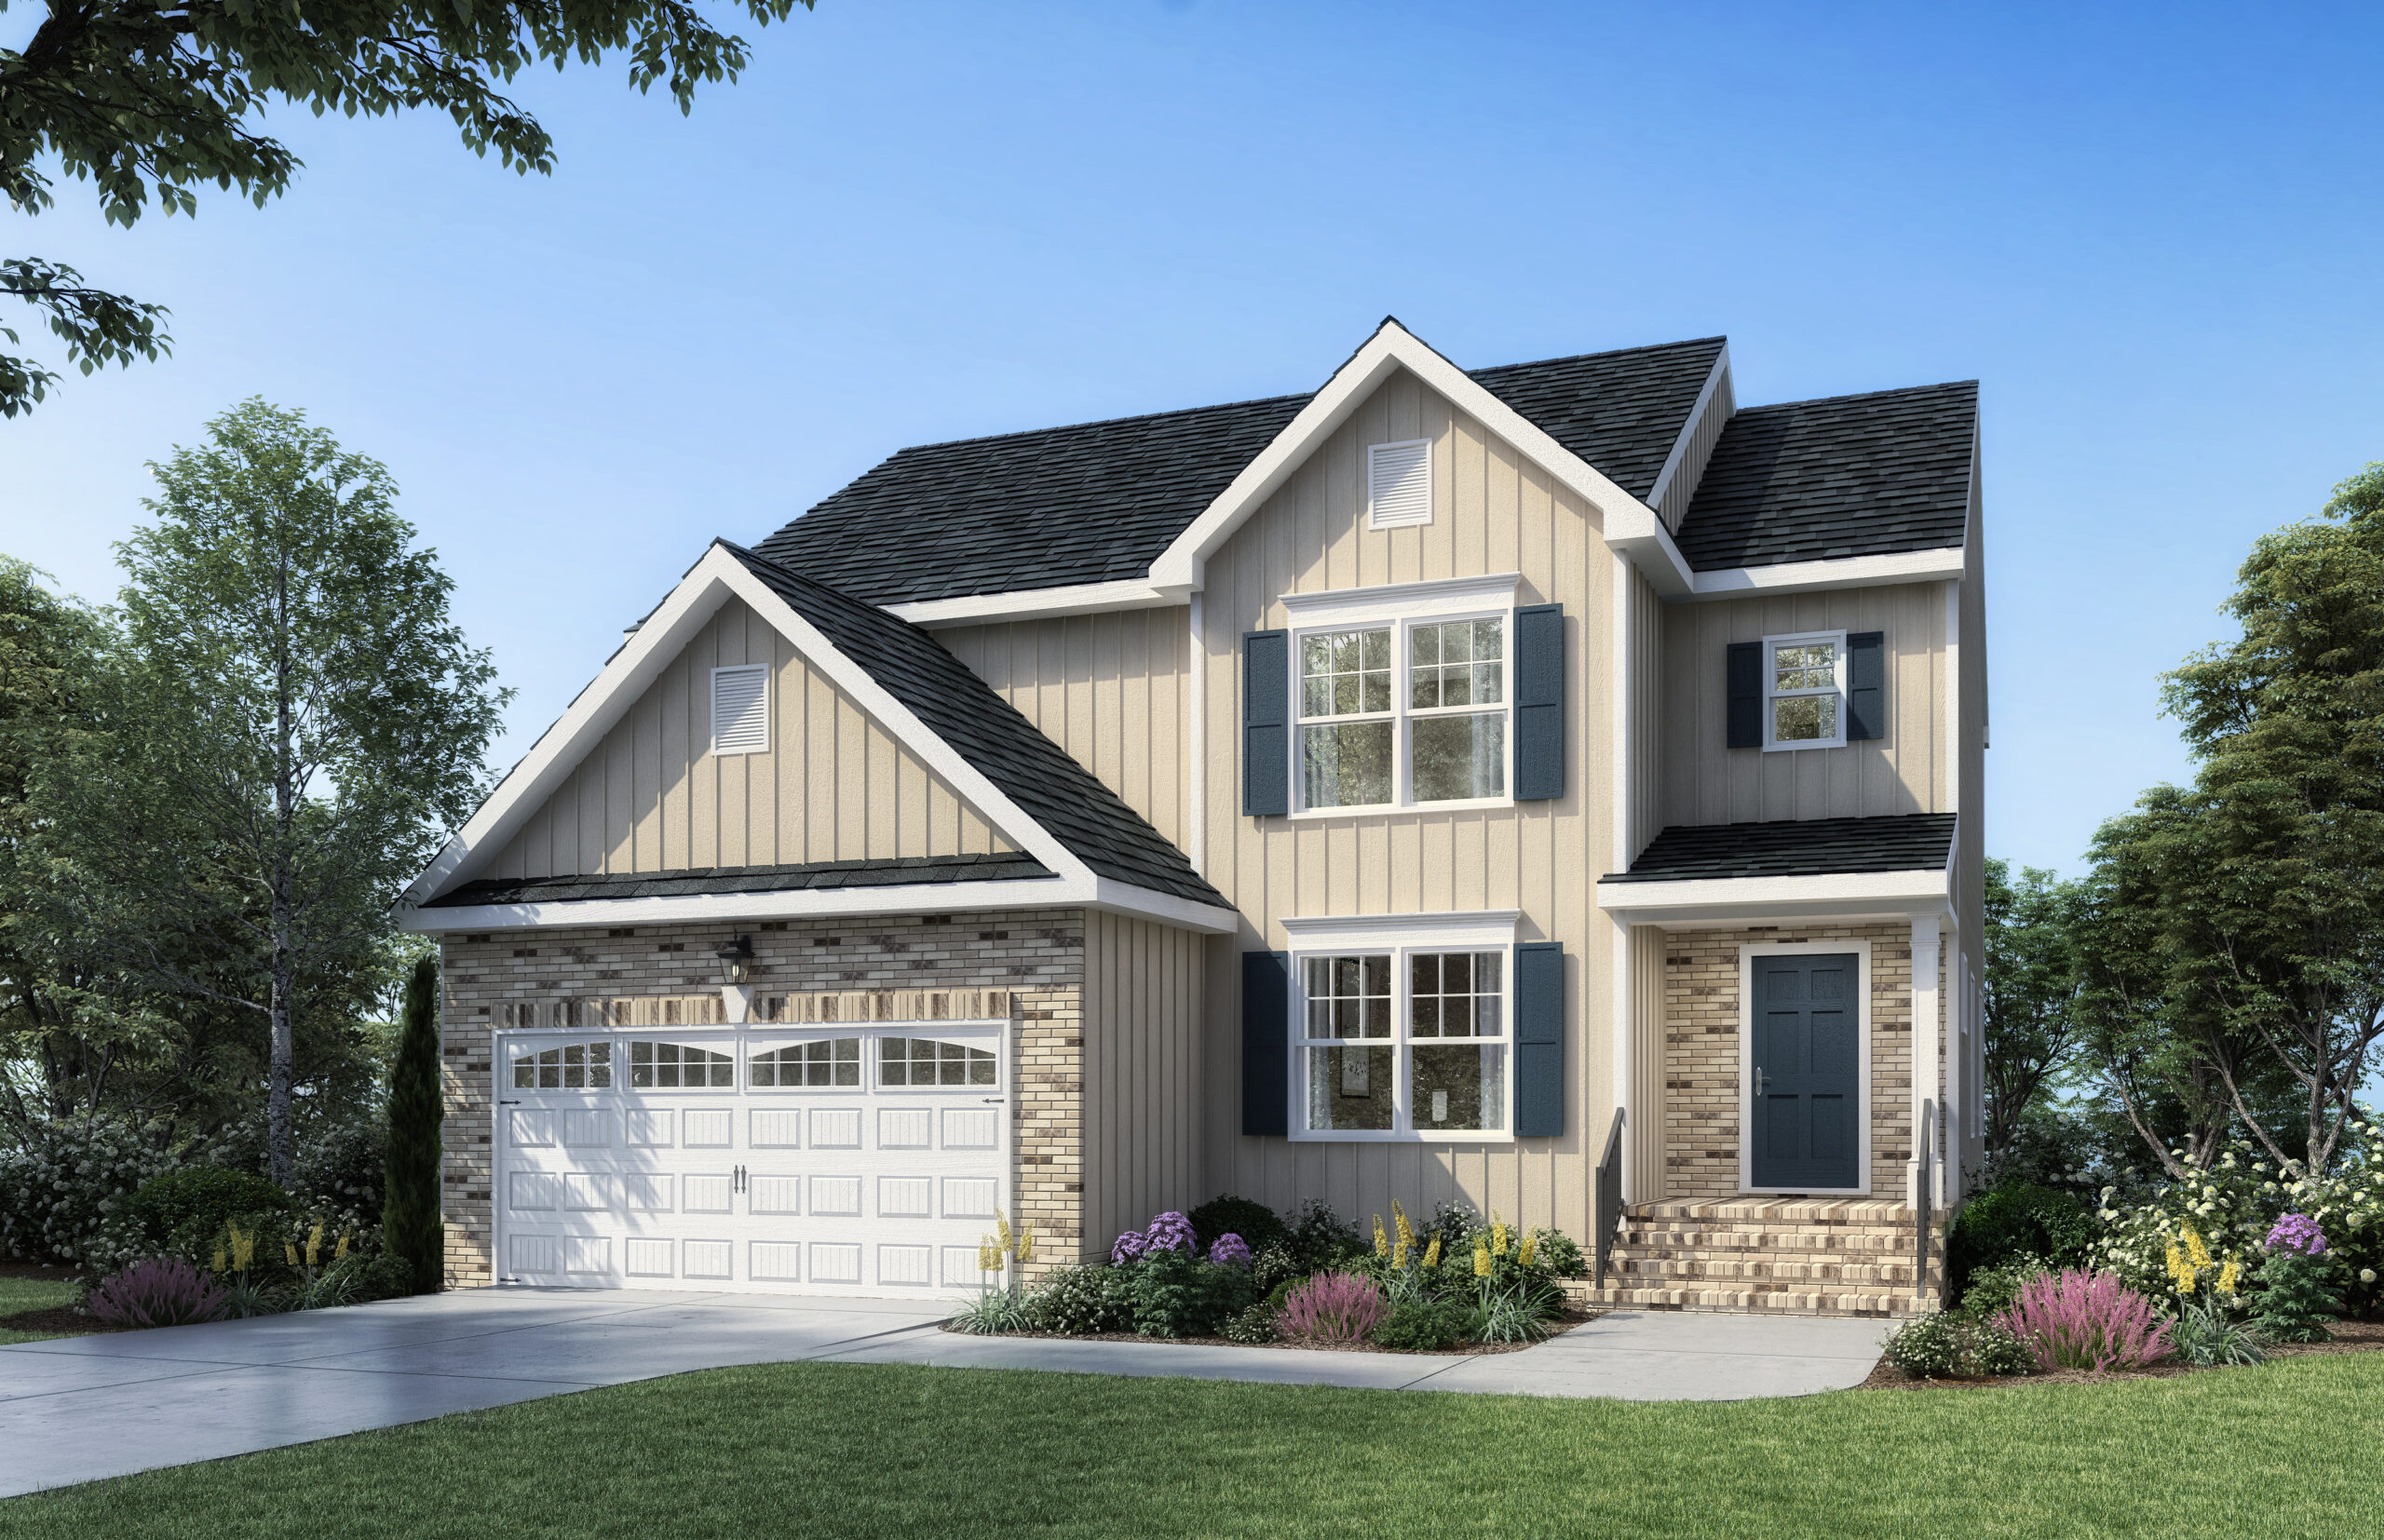 Rendering of Willow Elevation A with Brick Accents and Porch Boyd Homes Castleton